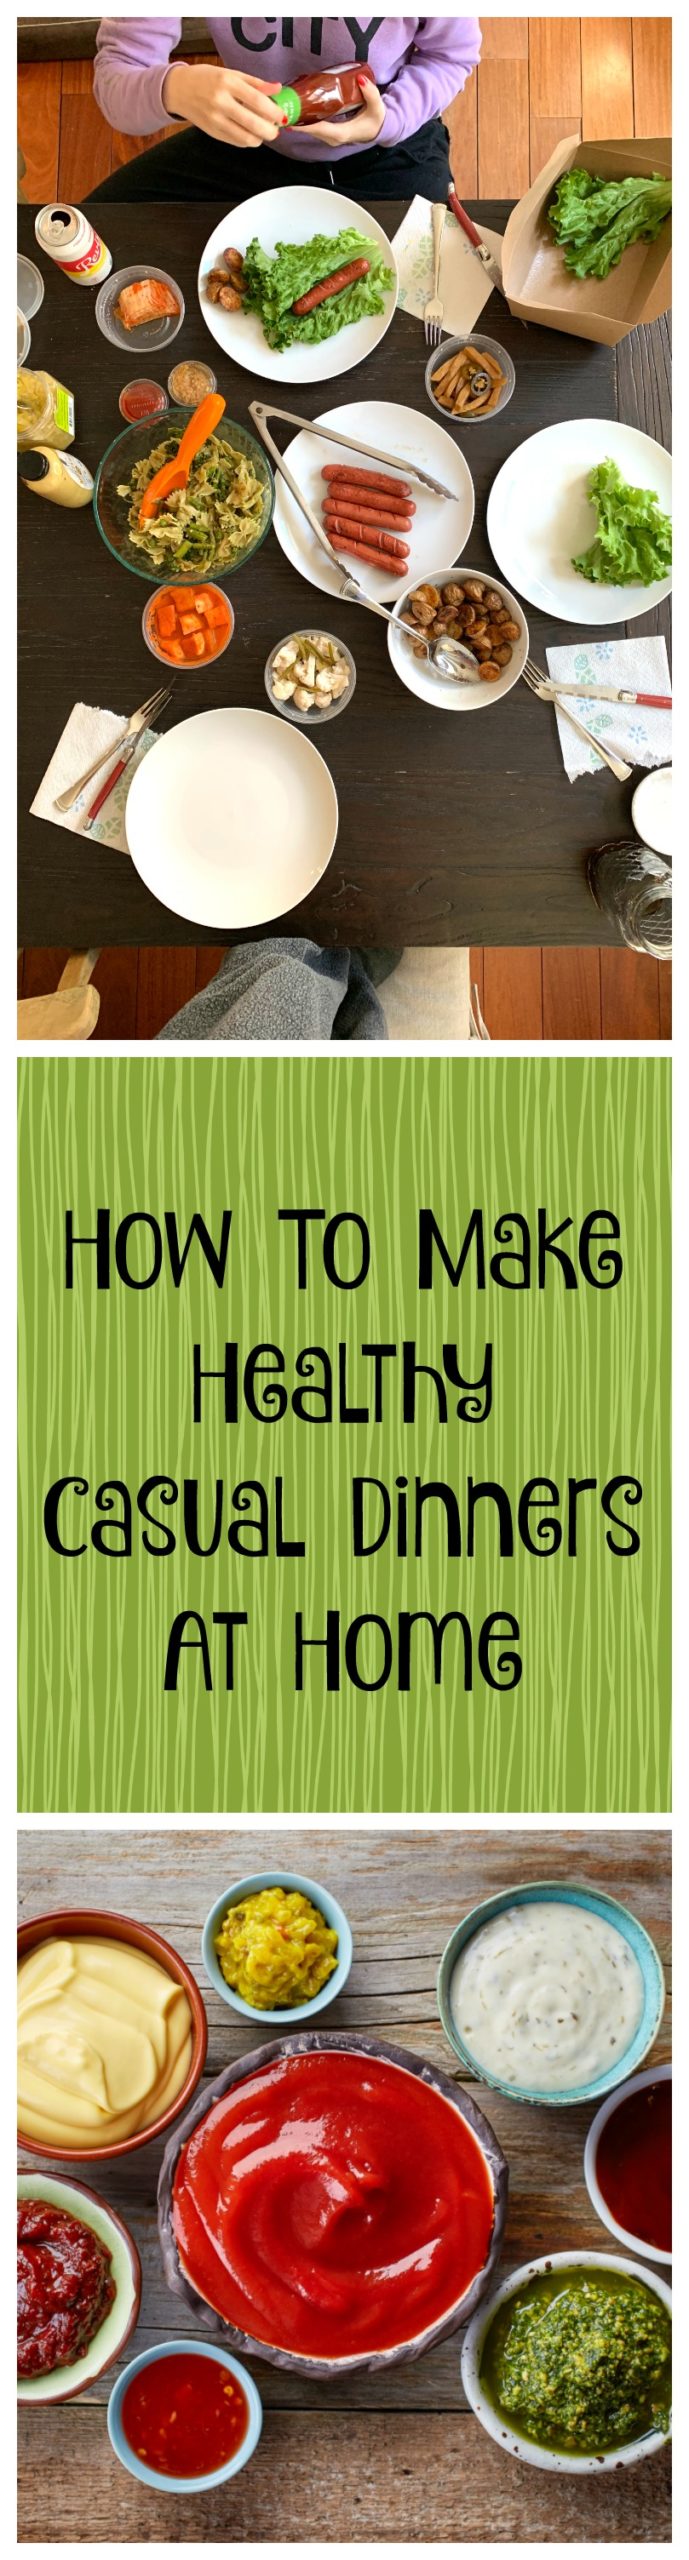 how to make healthy casual dinners at home